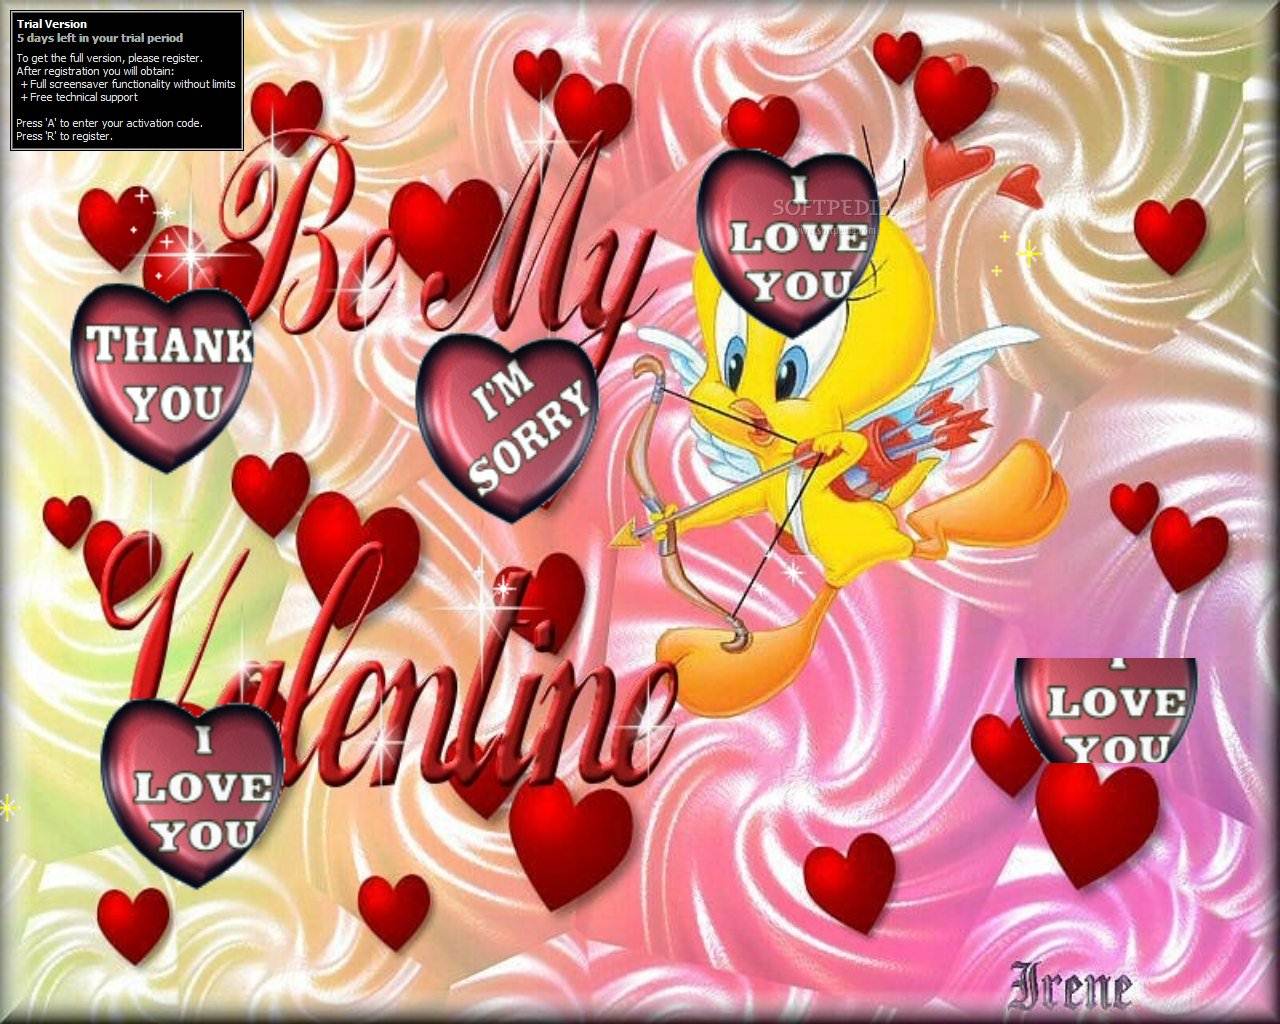 The Valentine Messages Screensaver Will Allow You To See Tweety